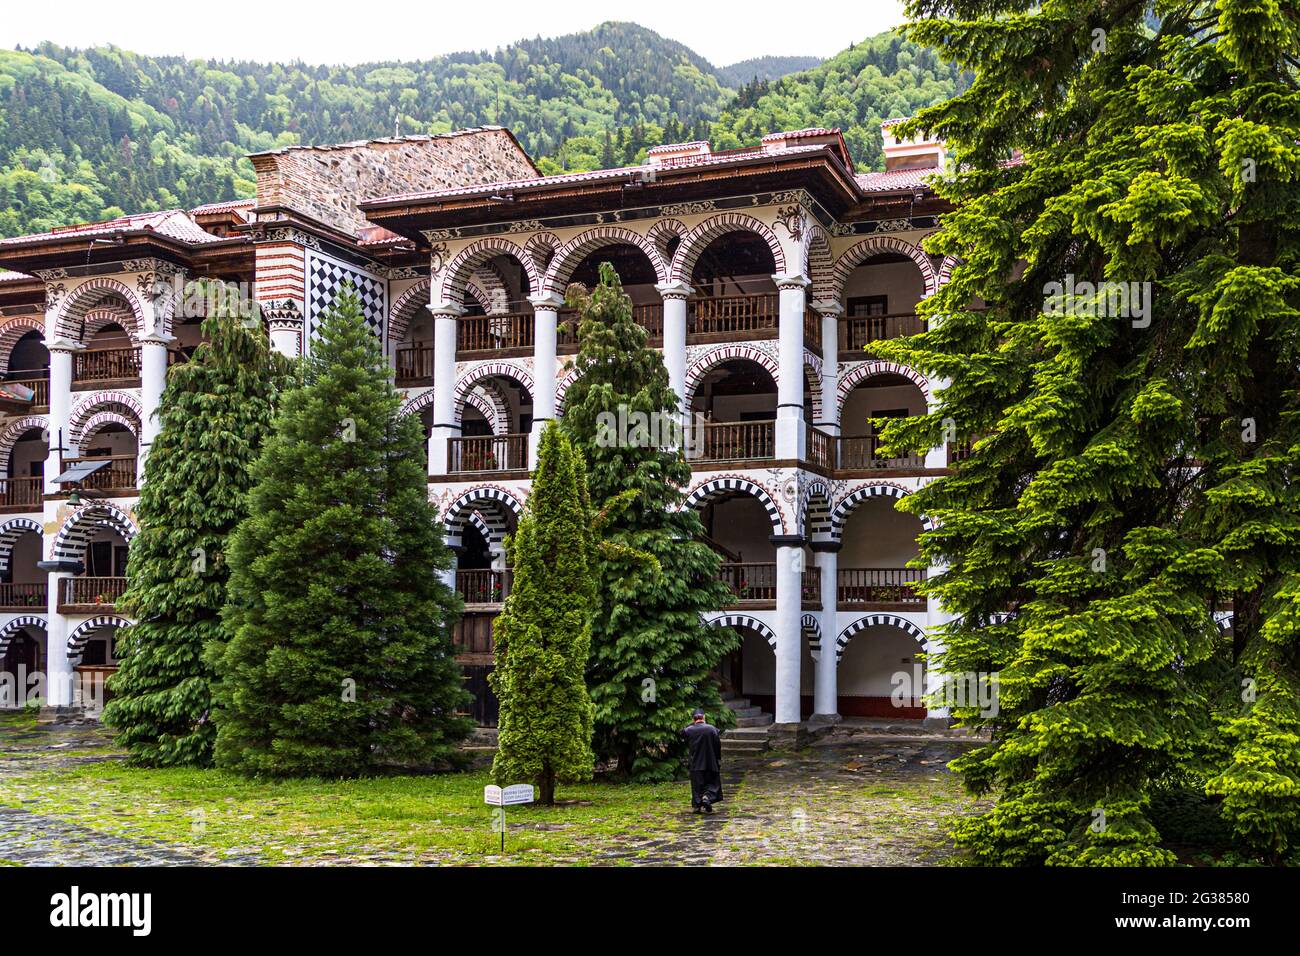 The Monastery of Saint Ivan of Rila, better known as the Rila Monastery (Bulgarian: Рилски манастир, Rilski manastir) is the largest and most famous Eastern Orthodox monastery in Bulgaria.It belongs to the UNESCO World Heritage. Stock Photo